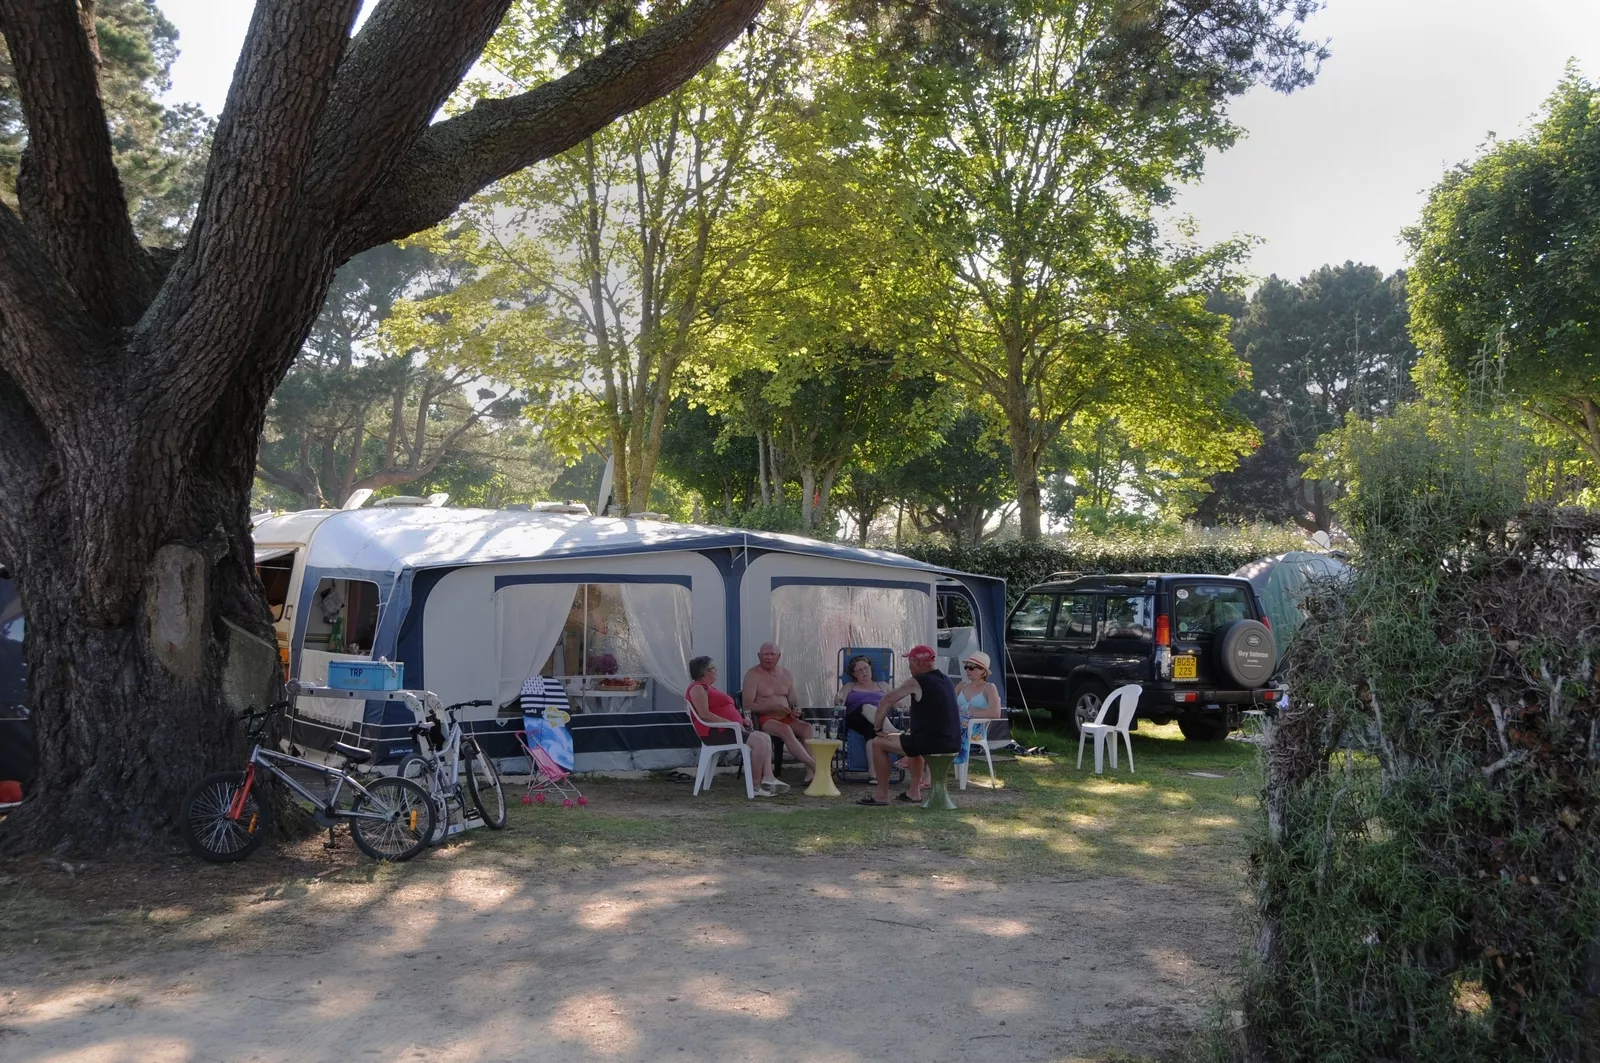 Camping du Letty in France, Europe | Campsites - Rated 4